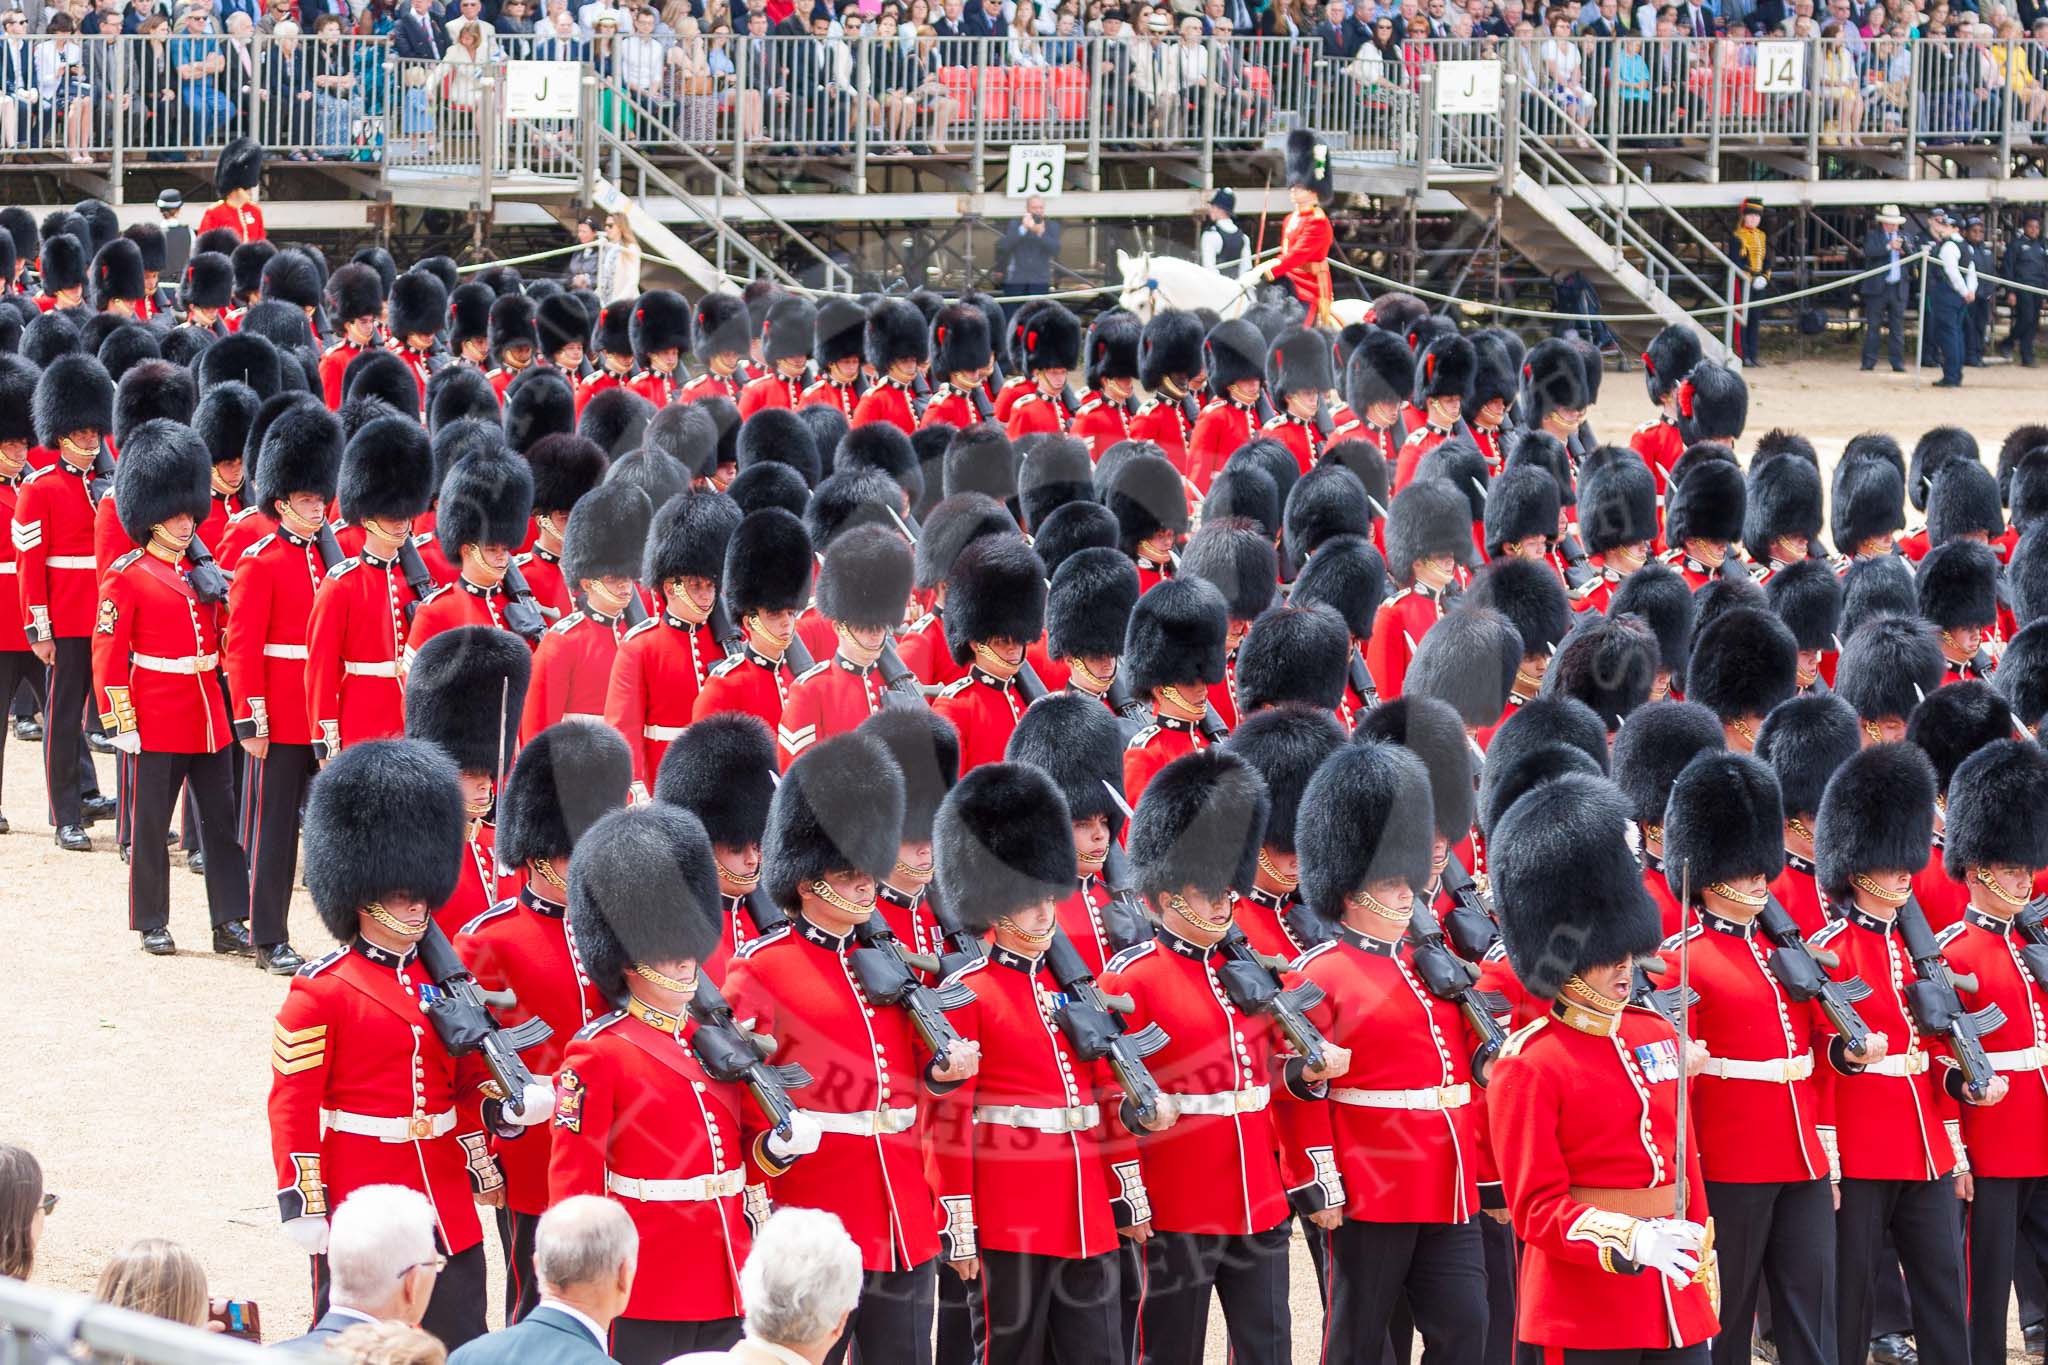 The Colonel's Review 2015.
Horse Guards Parade, Westminster,
London,

United Kingdom,
on 06 June 2015 at 11:35, image #385